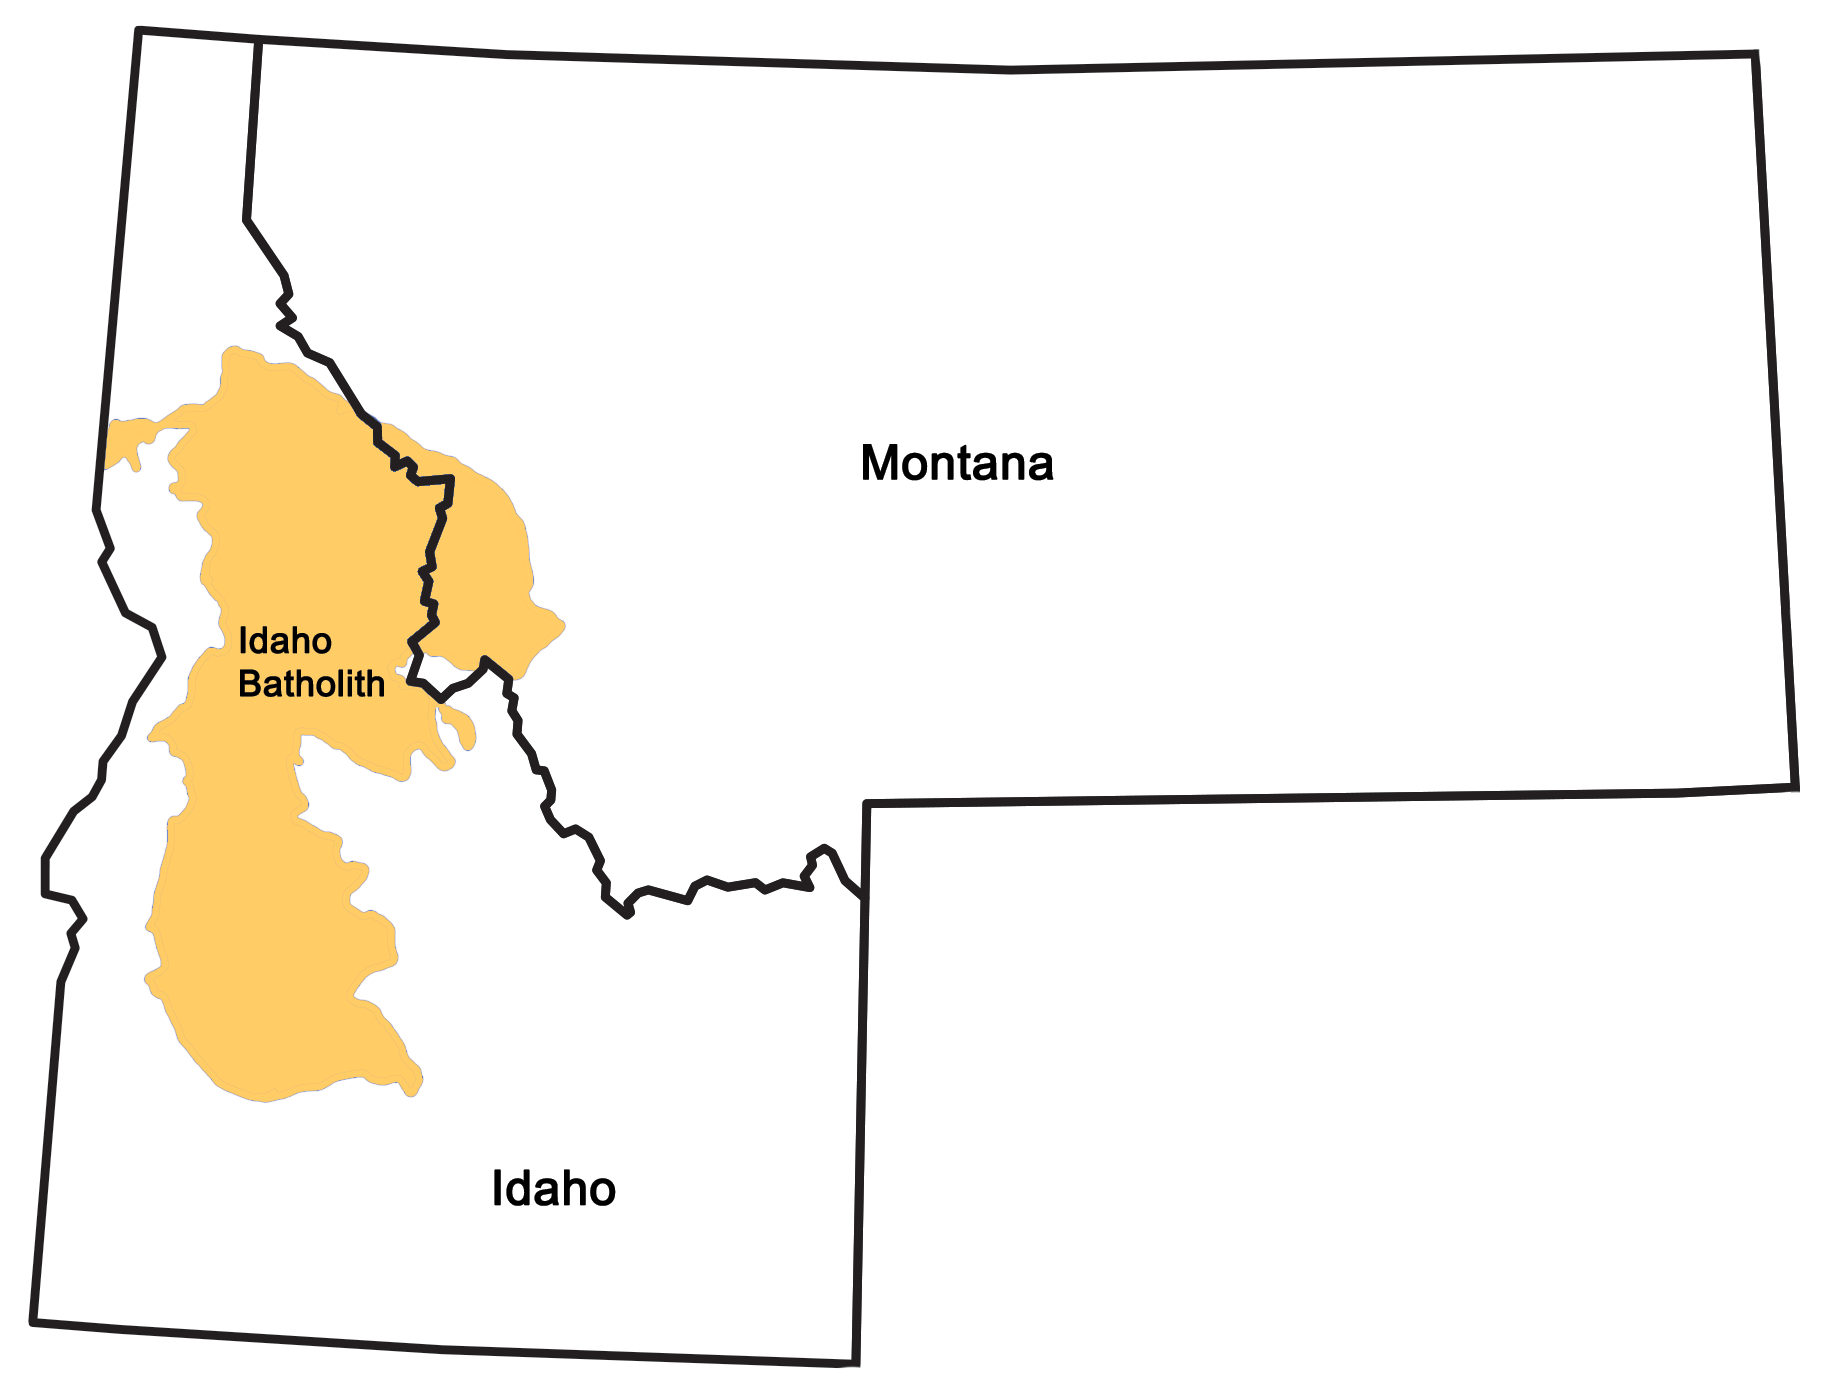 Simple map showing the location of the Idaho Batholith in Idaho and western Montana.